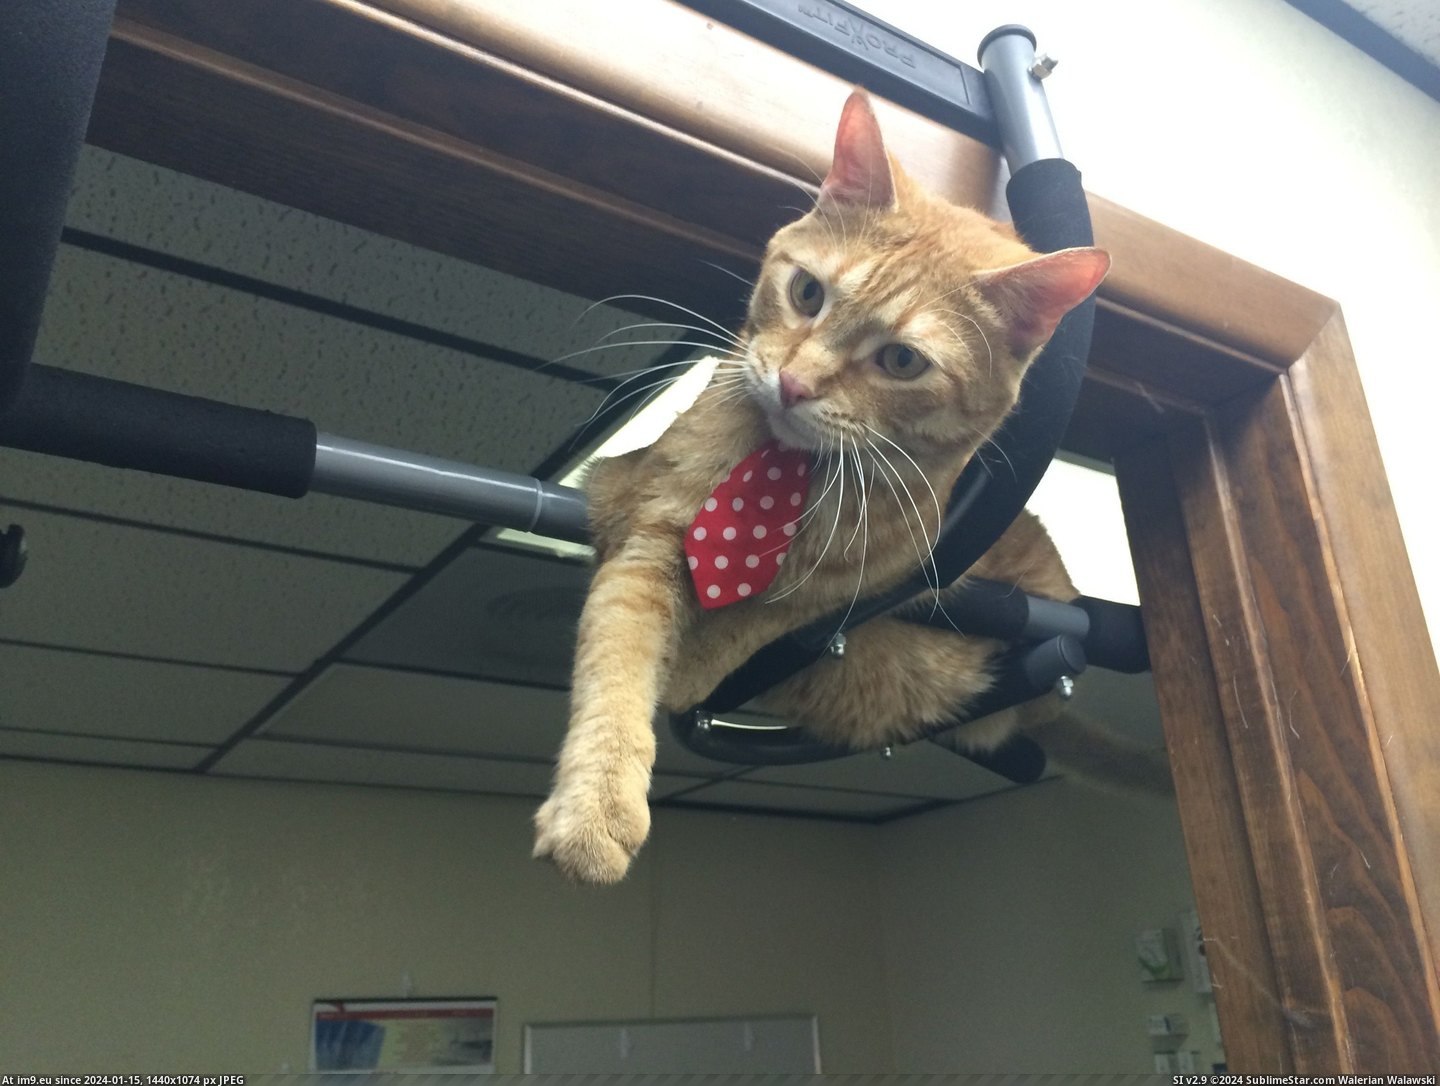 #Cats #Cat #Pull #Dexter #Office #Bar [Cats] Dexter the office cat uses my pull up bar more than I do Pic. (Image of album My r/CATS favs))